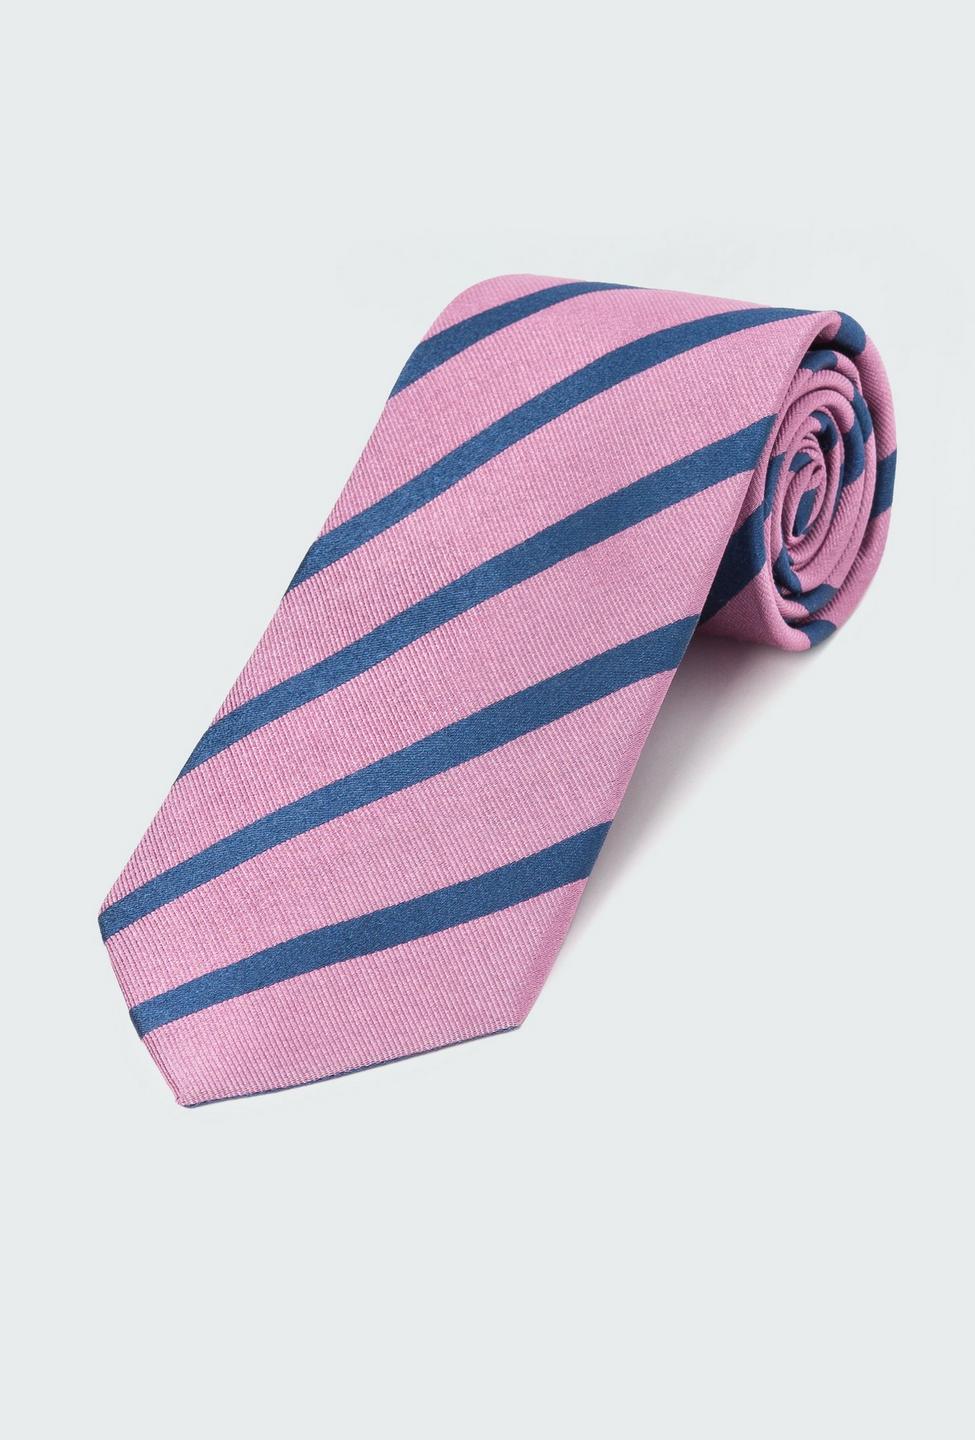 Pink tie - Striped Design from Indochino Collection